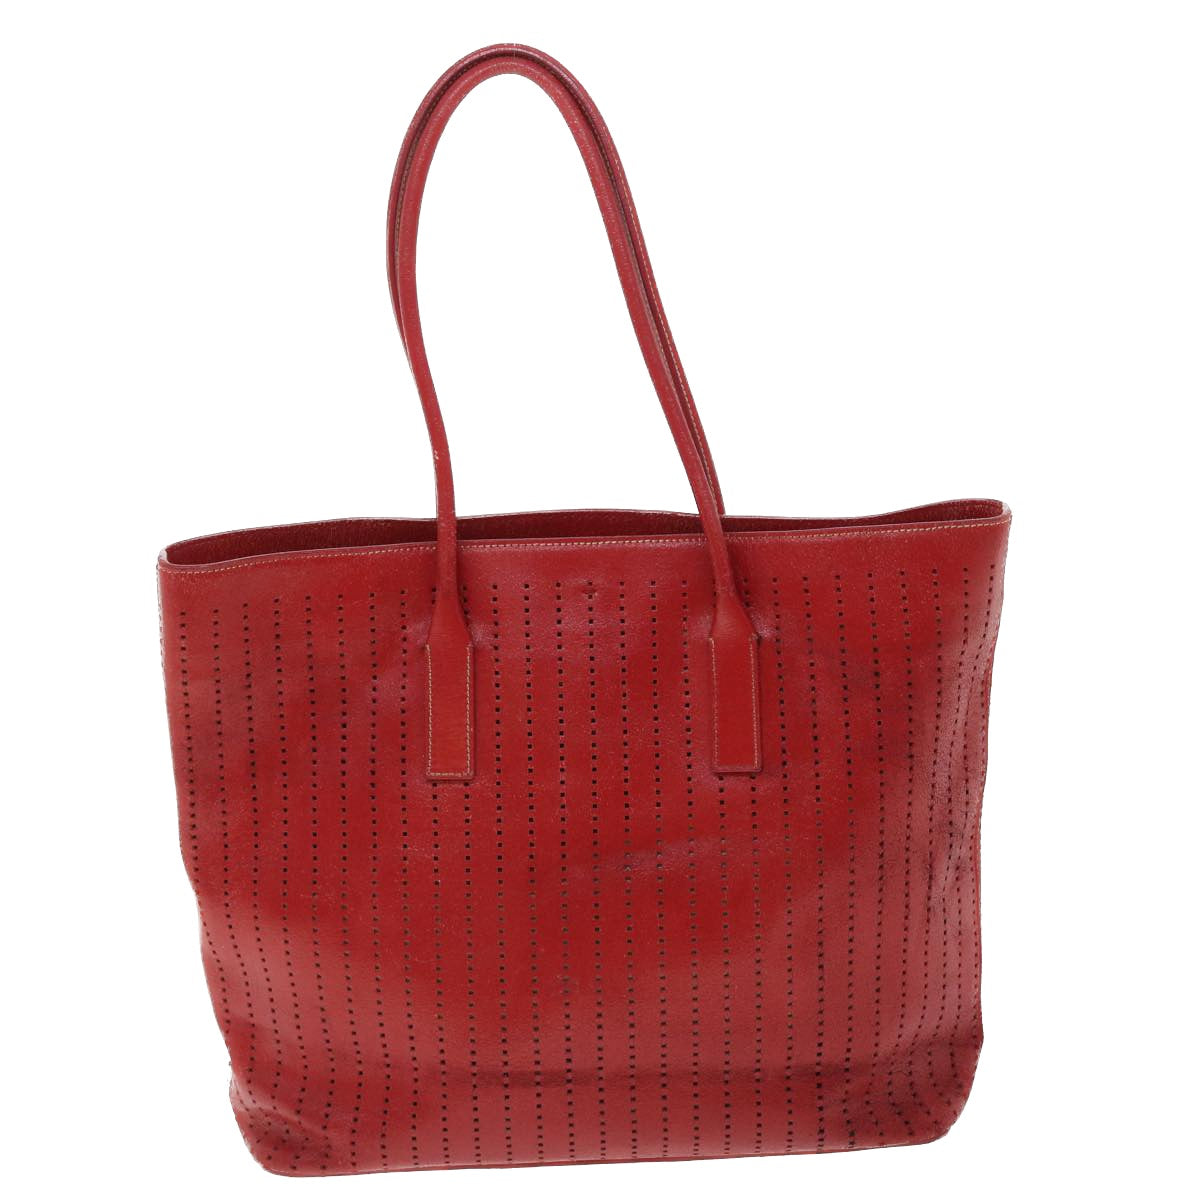 PRADA Tote Bag Leather Red Auth bs7661 - 0